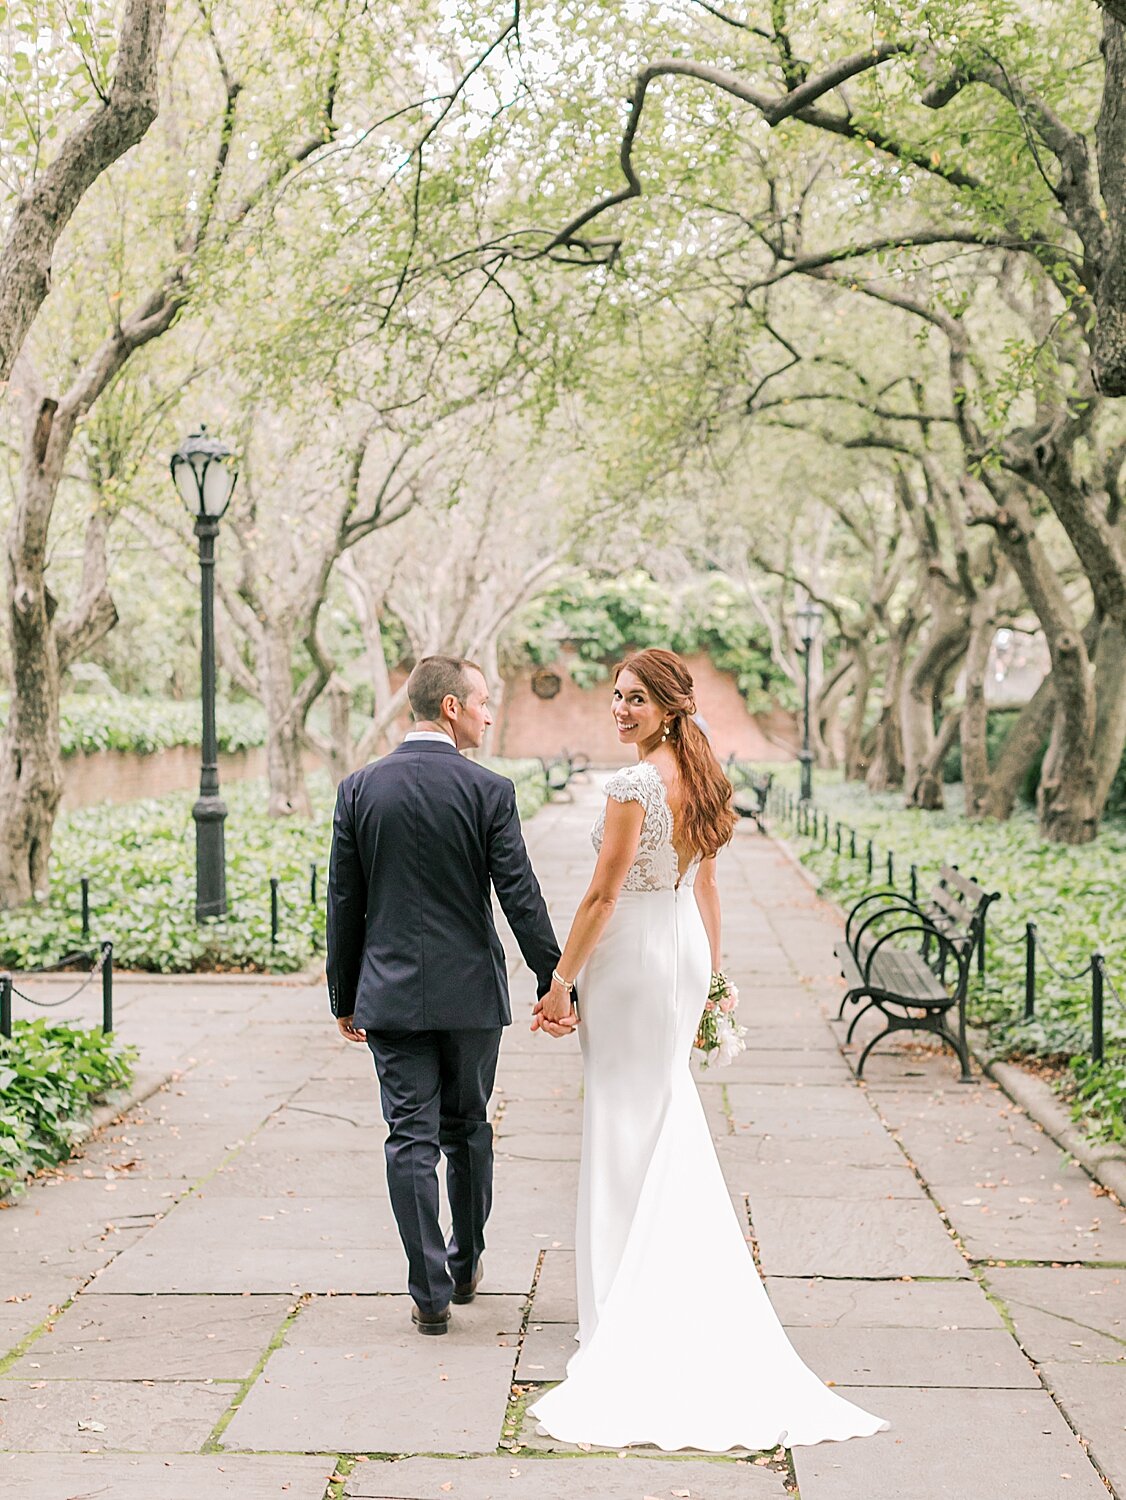 New York City elopement in Central Park | Asher Gardner Photography | Elopement at the Central Park Conservatory Gardens